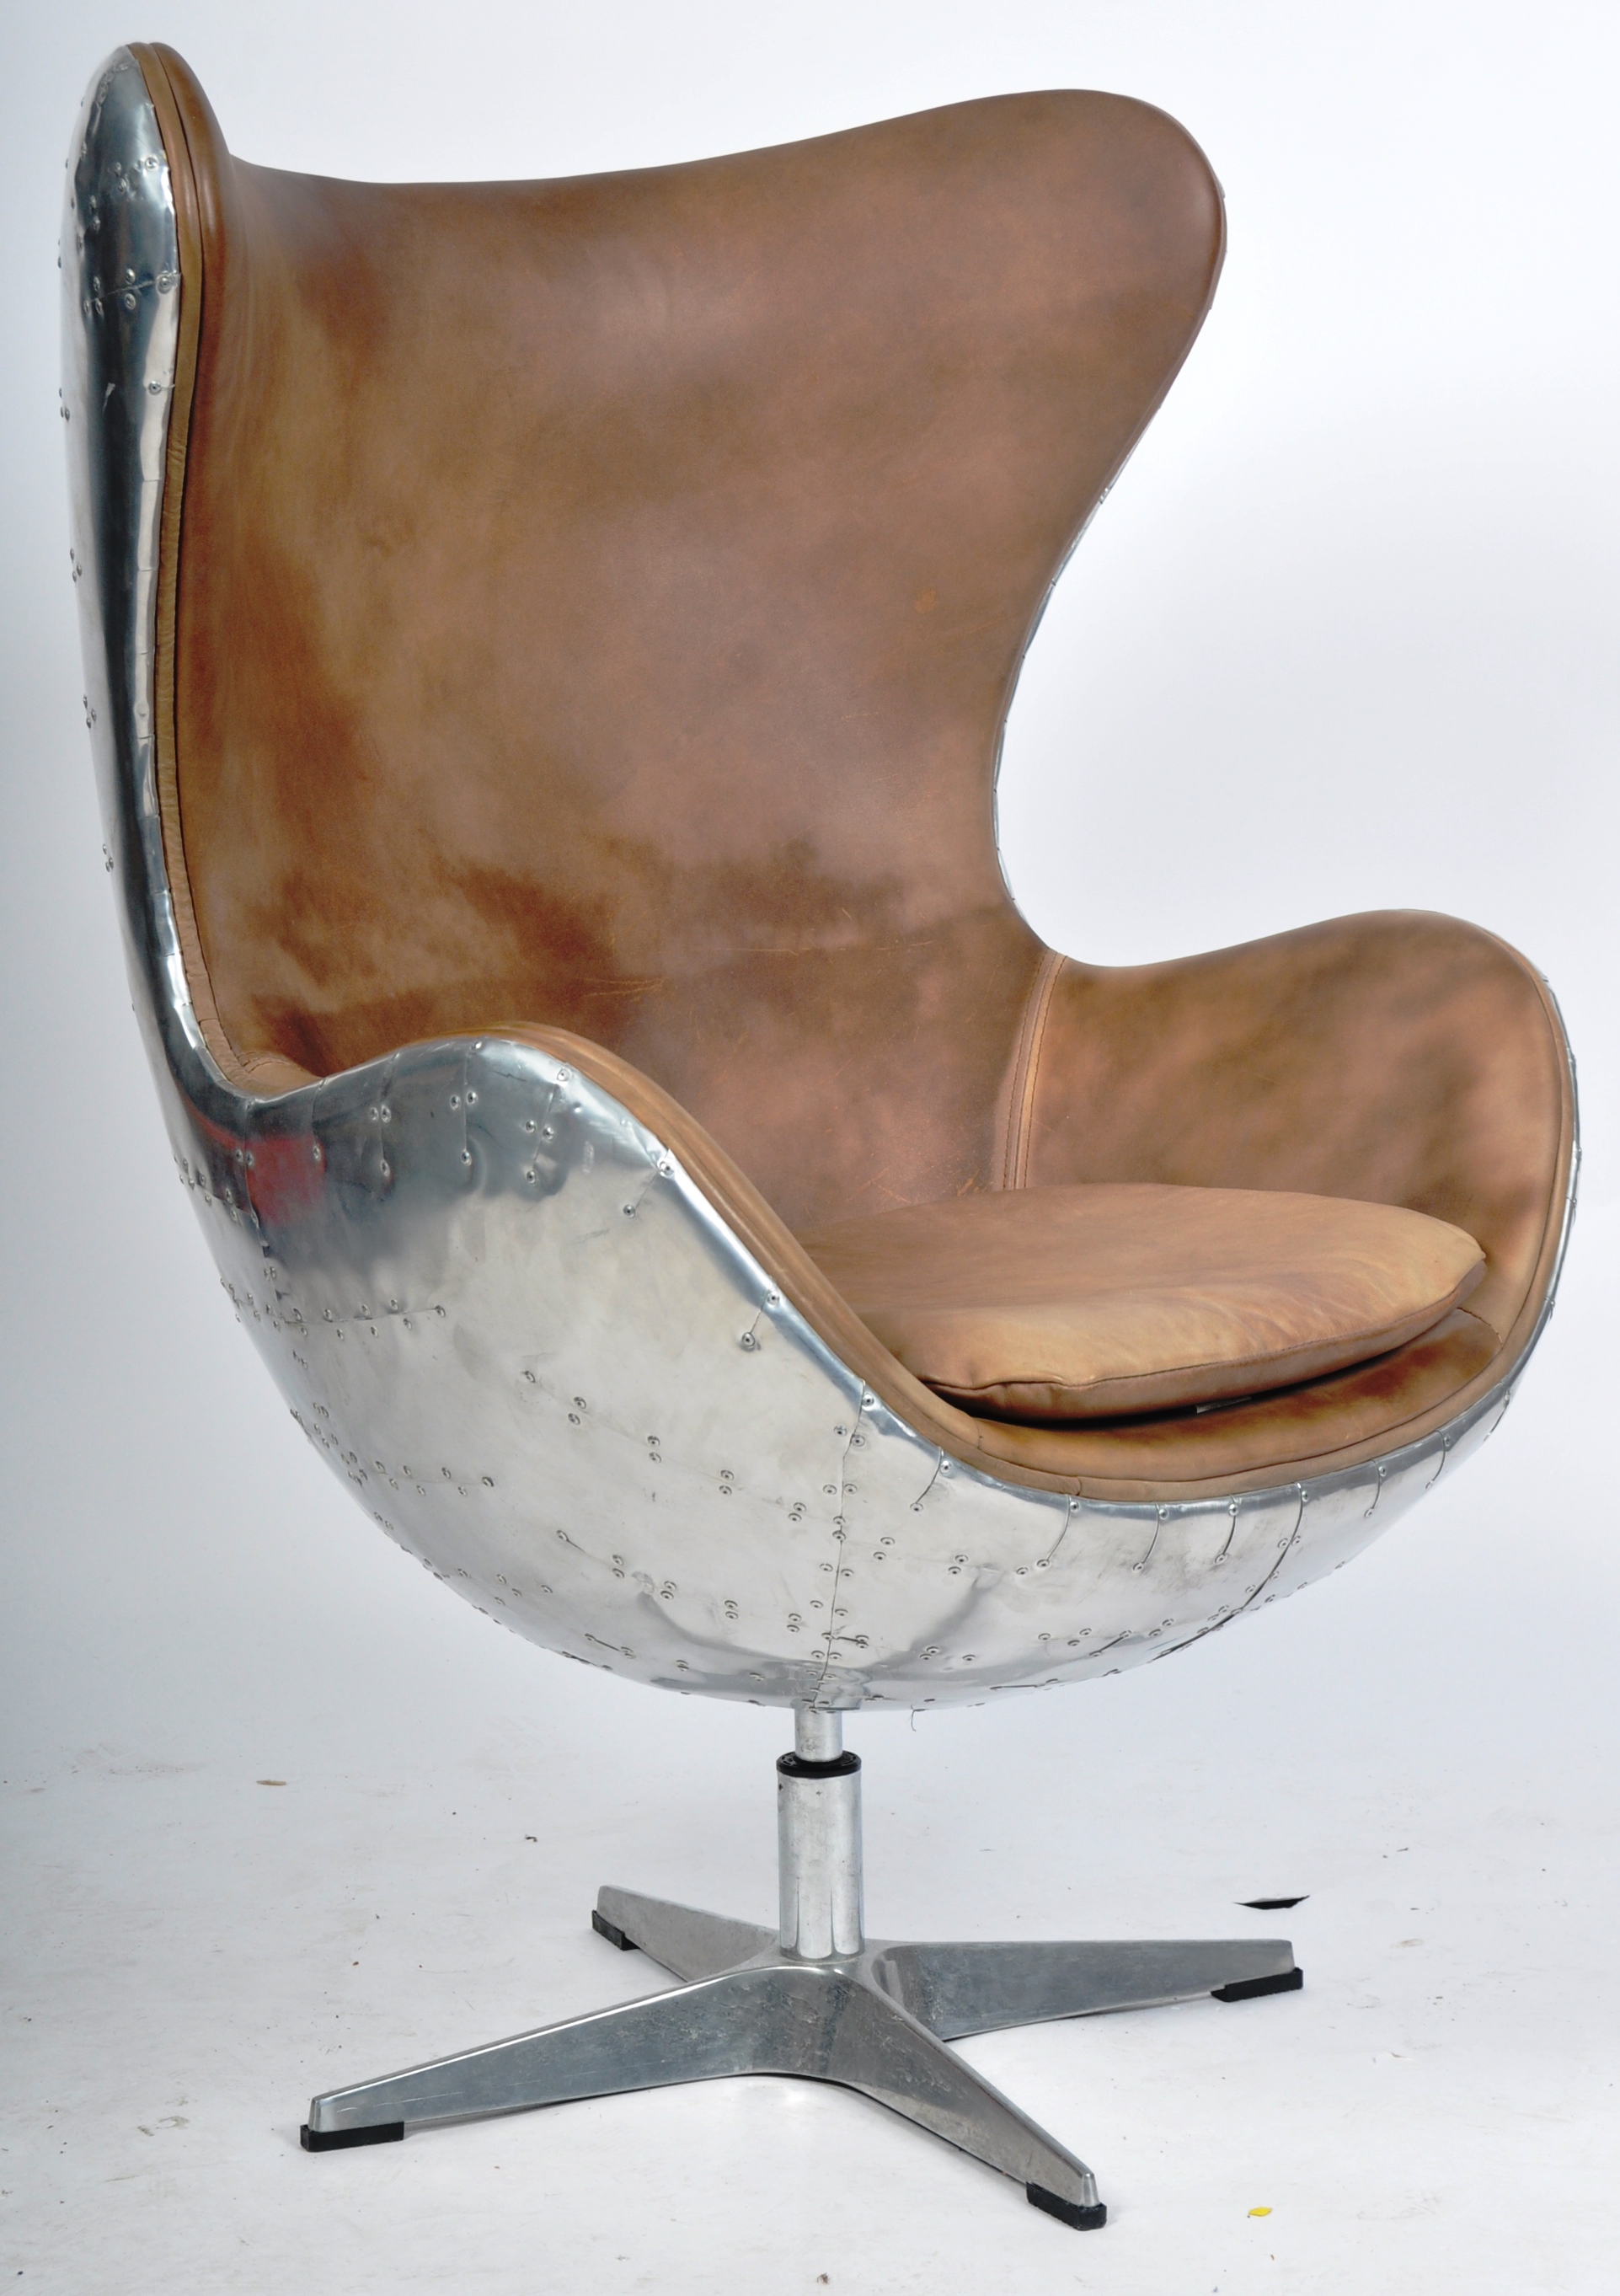 ANDREW MARTIN FURNITURE AVIATOR CHROME & LEATHER CHAIR